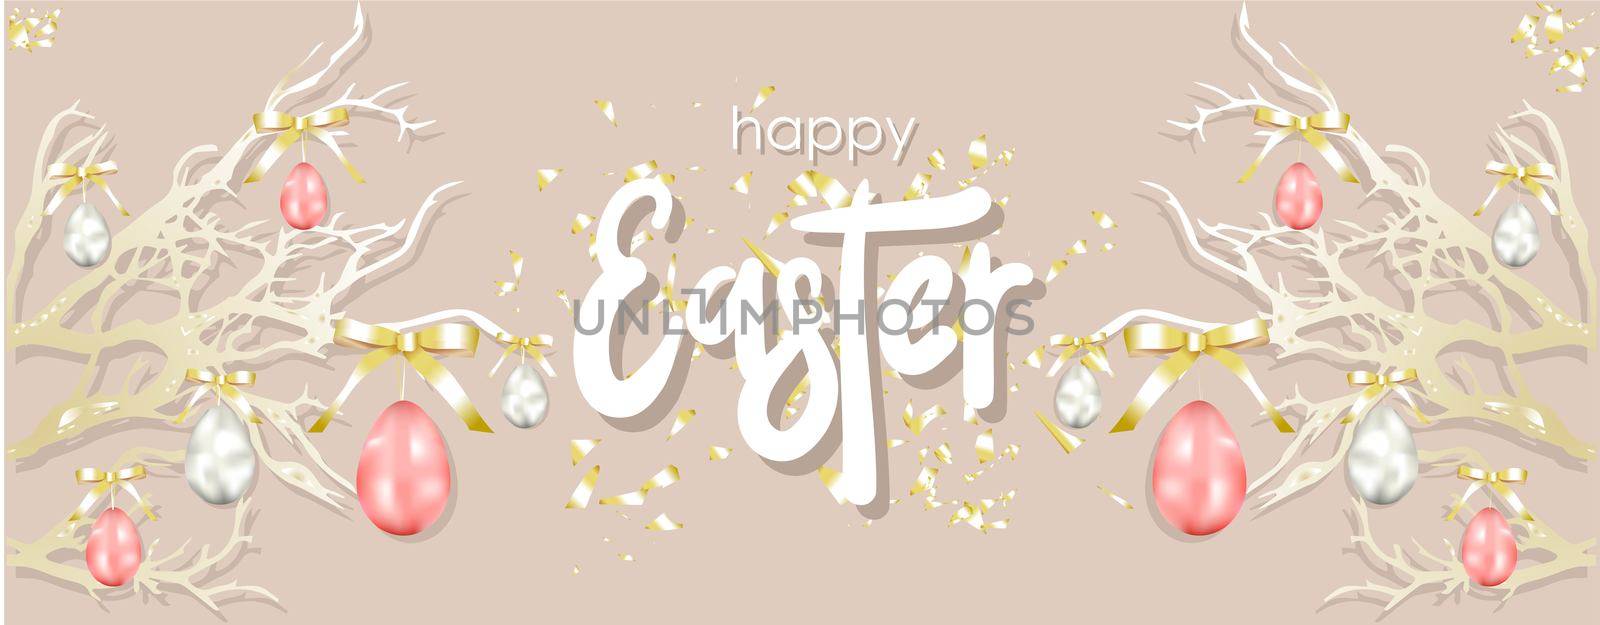 Easter and spring background. Easter lush tree. Abstract silver, pink and blue eggs. Eggs are hanging on a ribbon. Bright spring holiday composition. Greeting card, banner, poster.